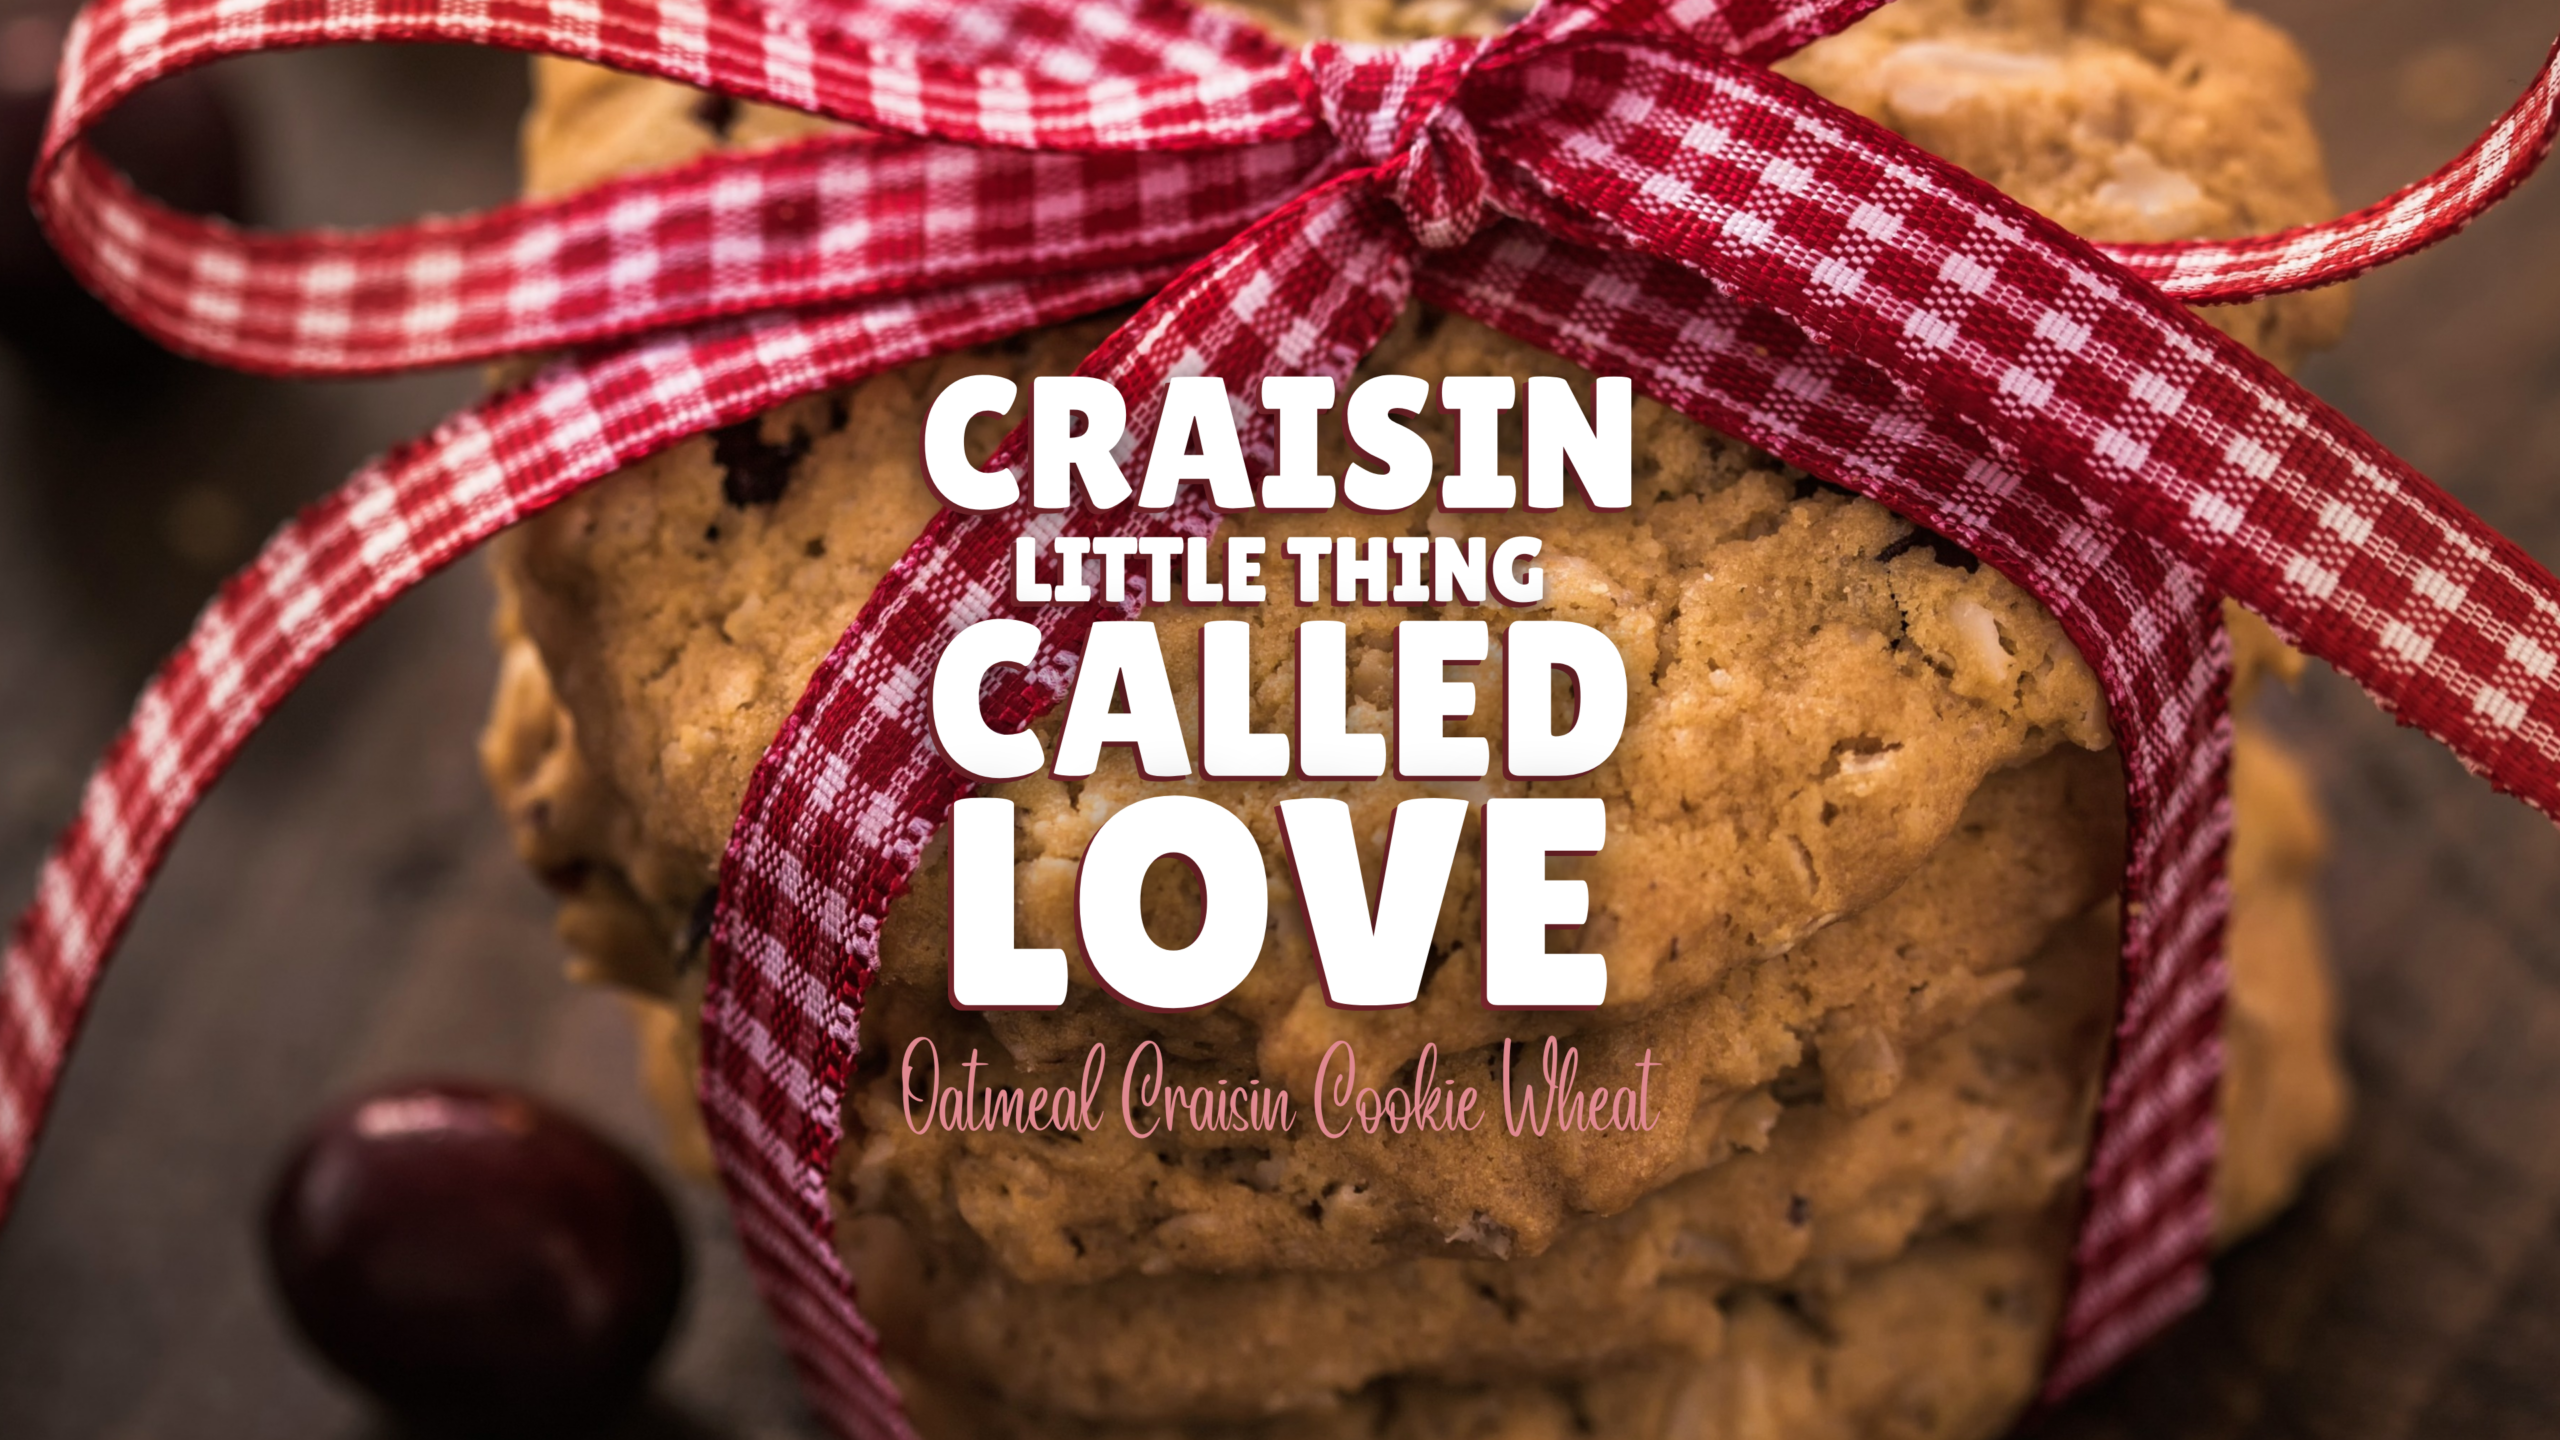 Craisin Little Thing Called Love Oatmeal Craisin Cookie Wheat Release at On Rotation